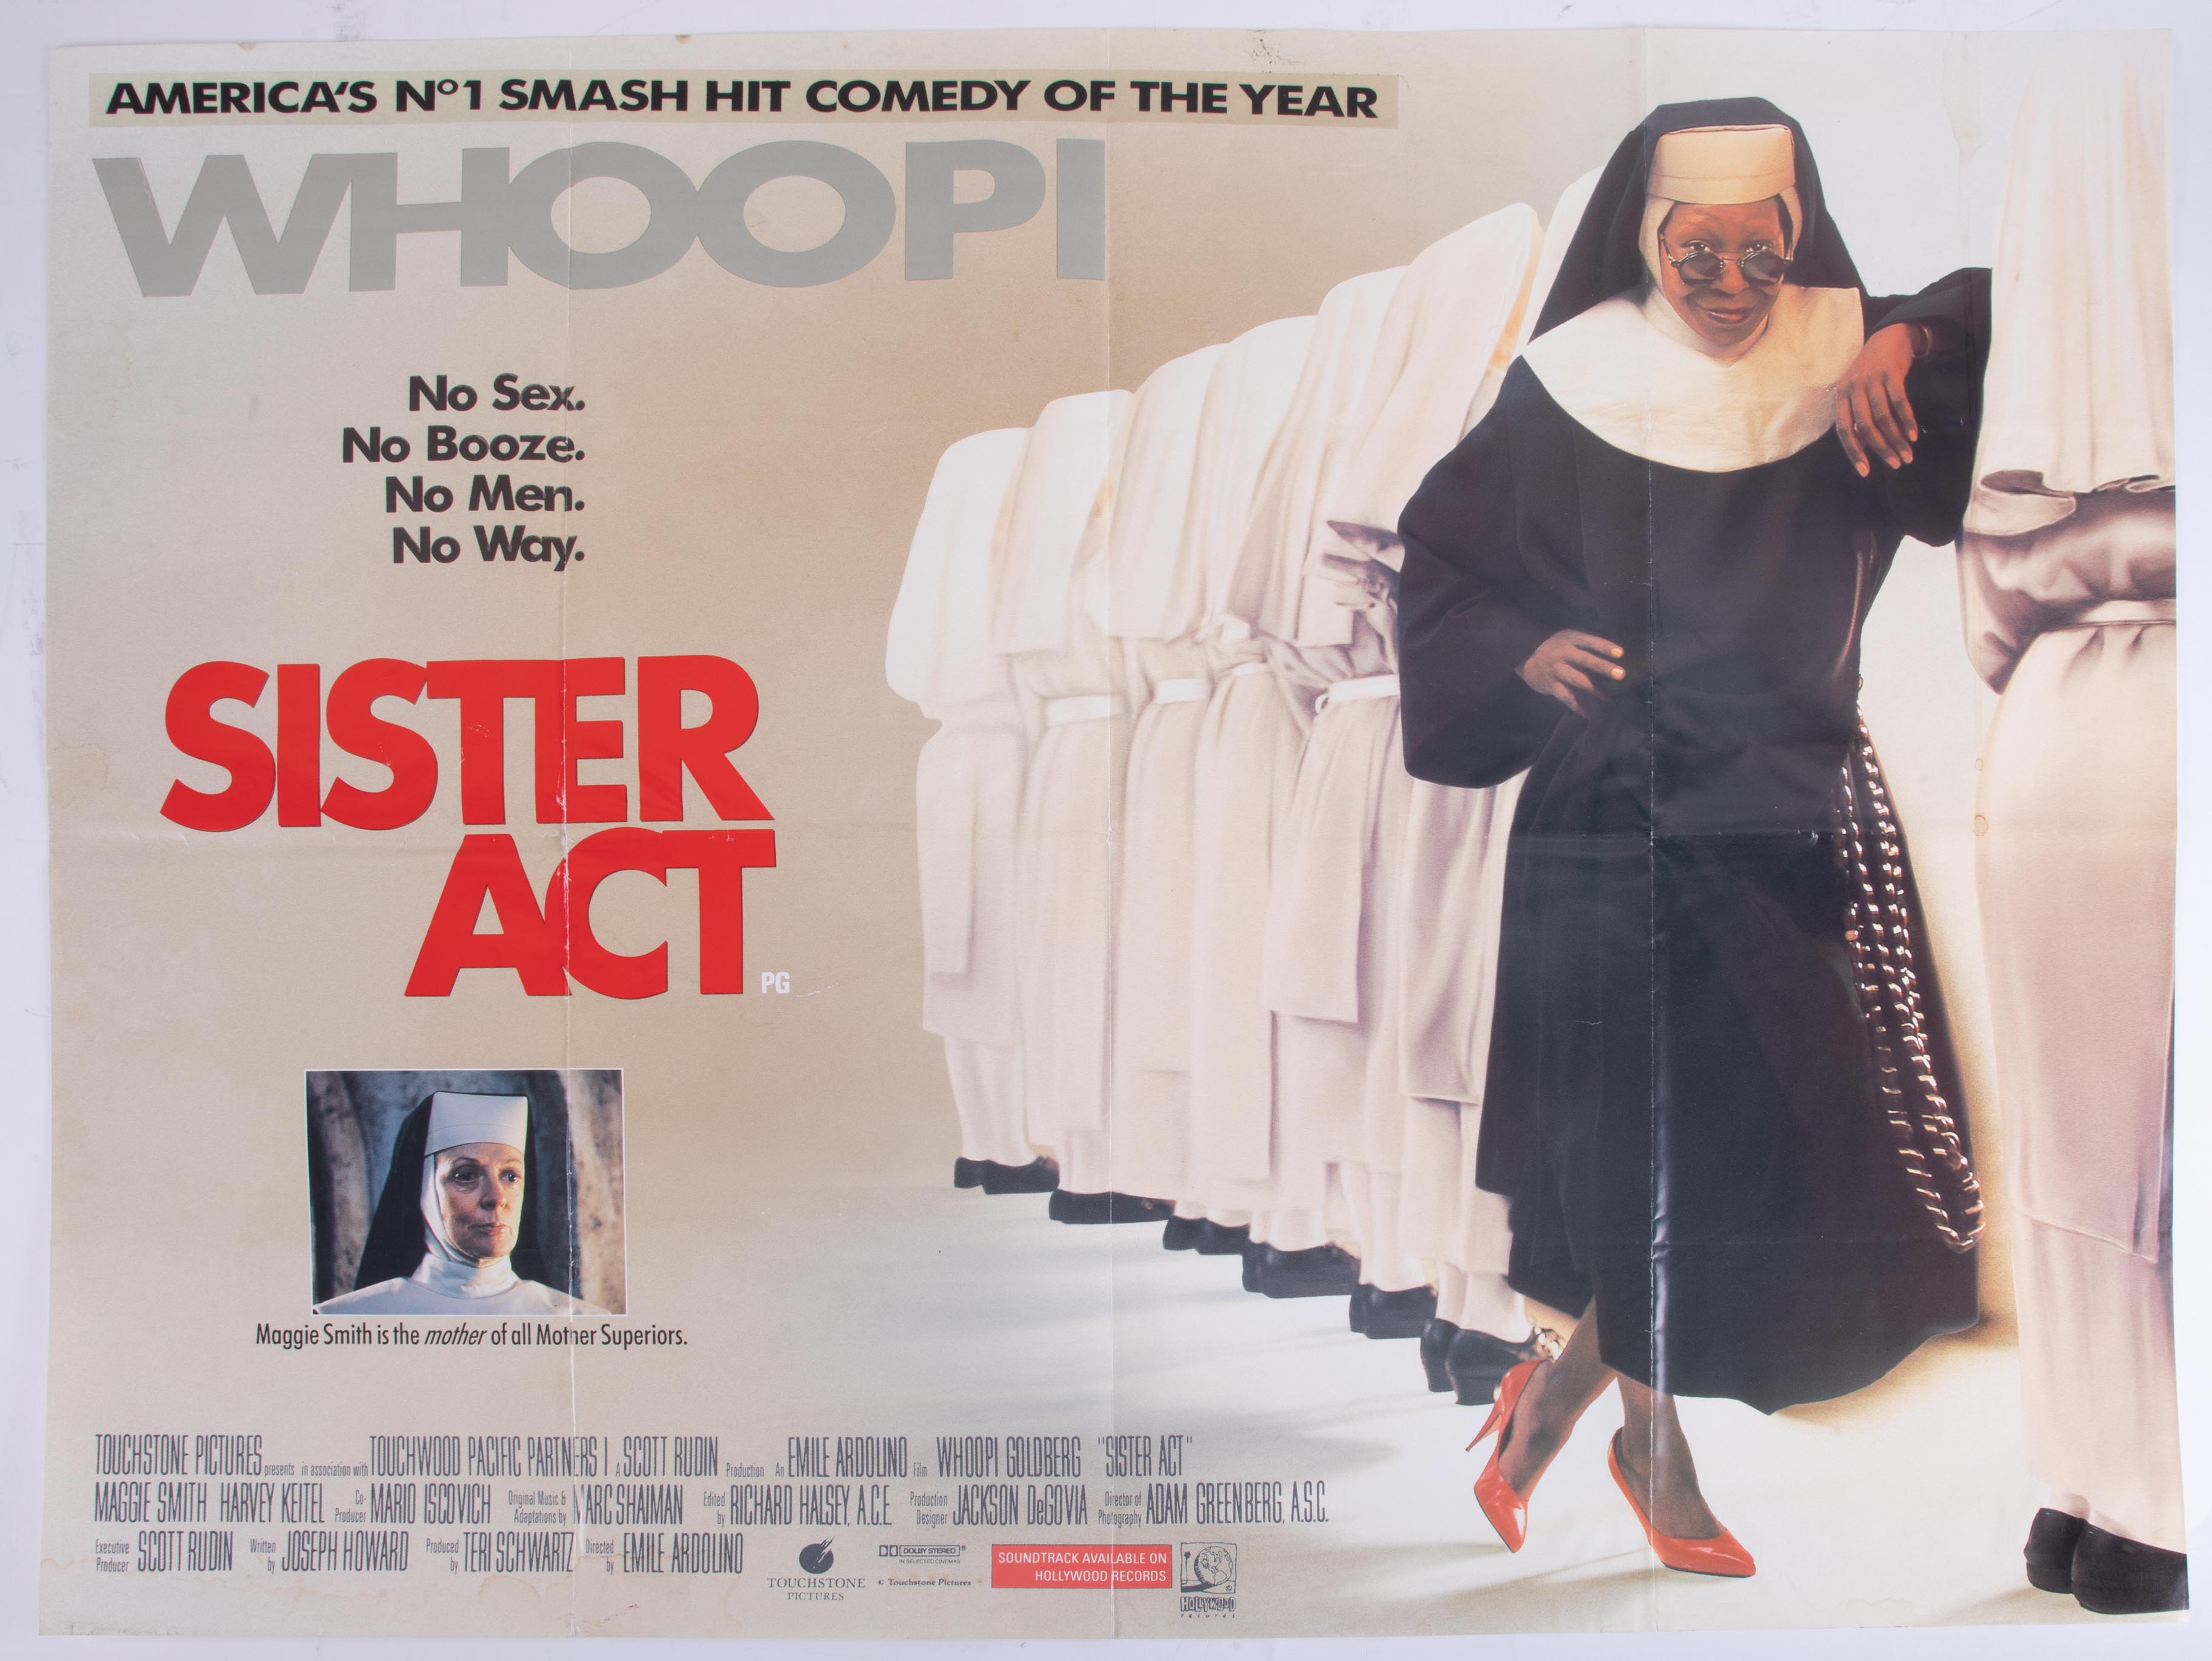 Cinema Poster for the film 'Sister Act' year 1992 featuring Whoopi Goldberg. Provenance: The John